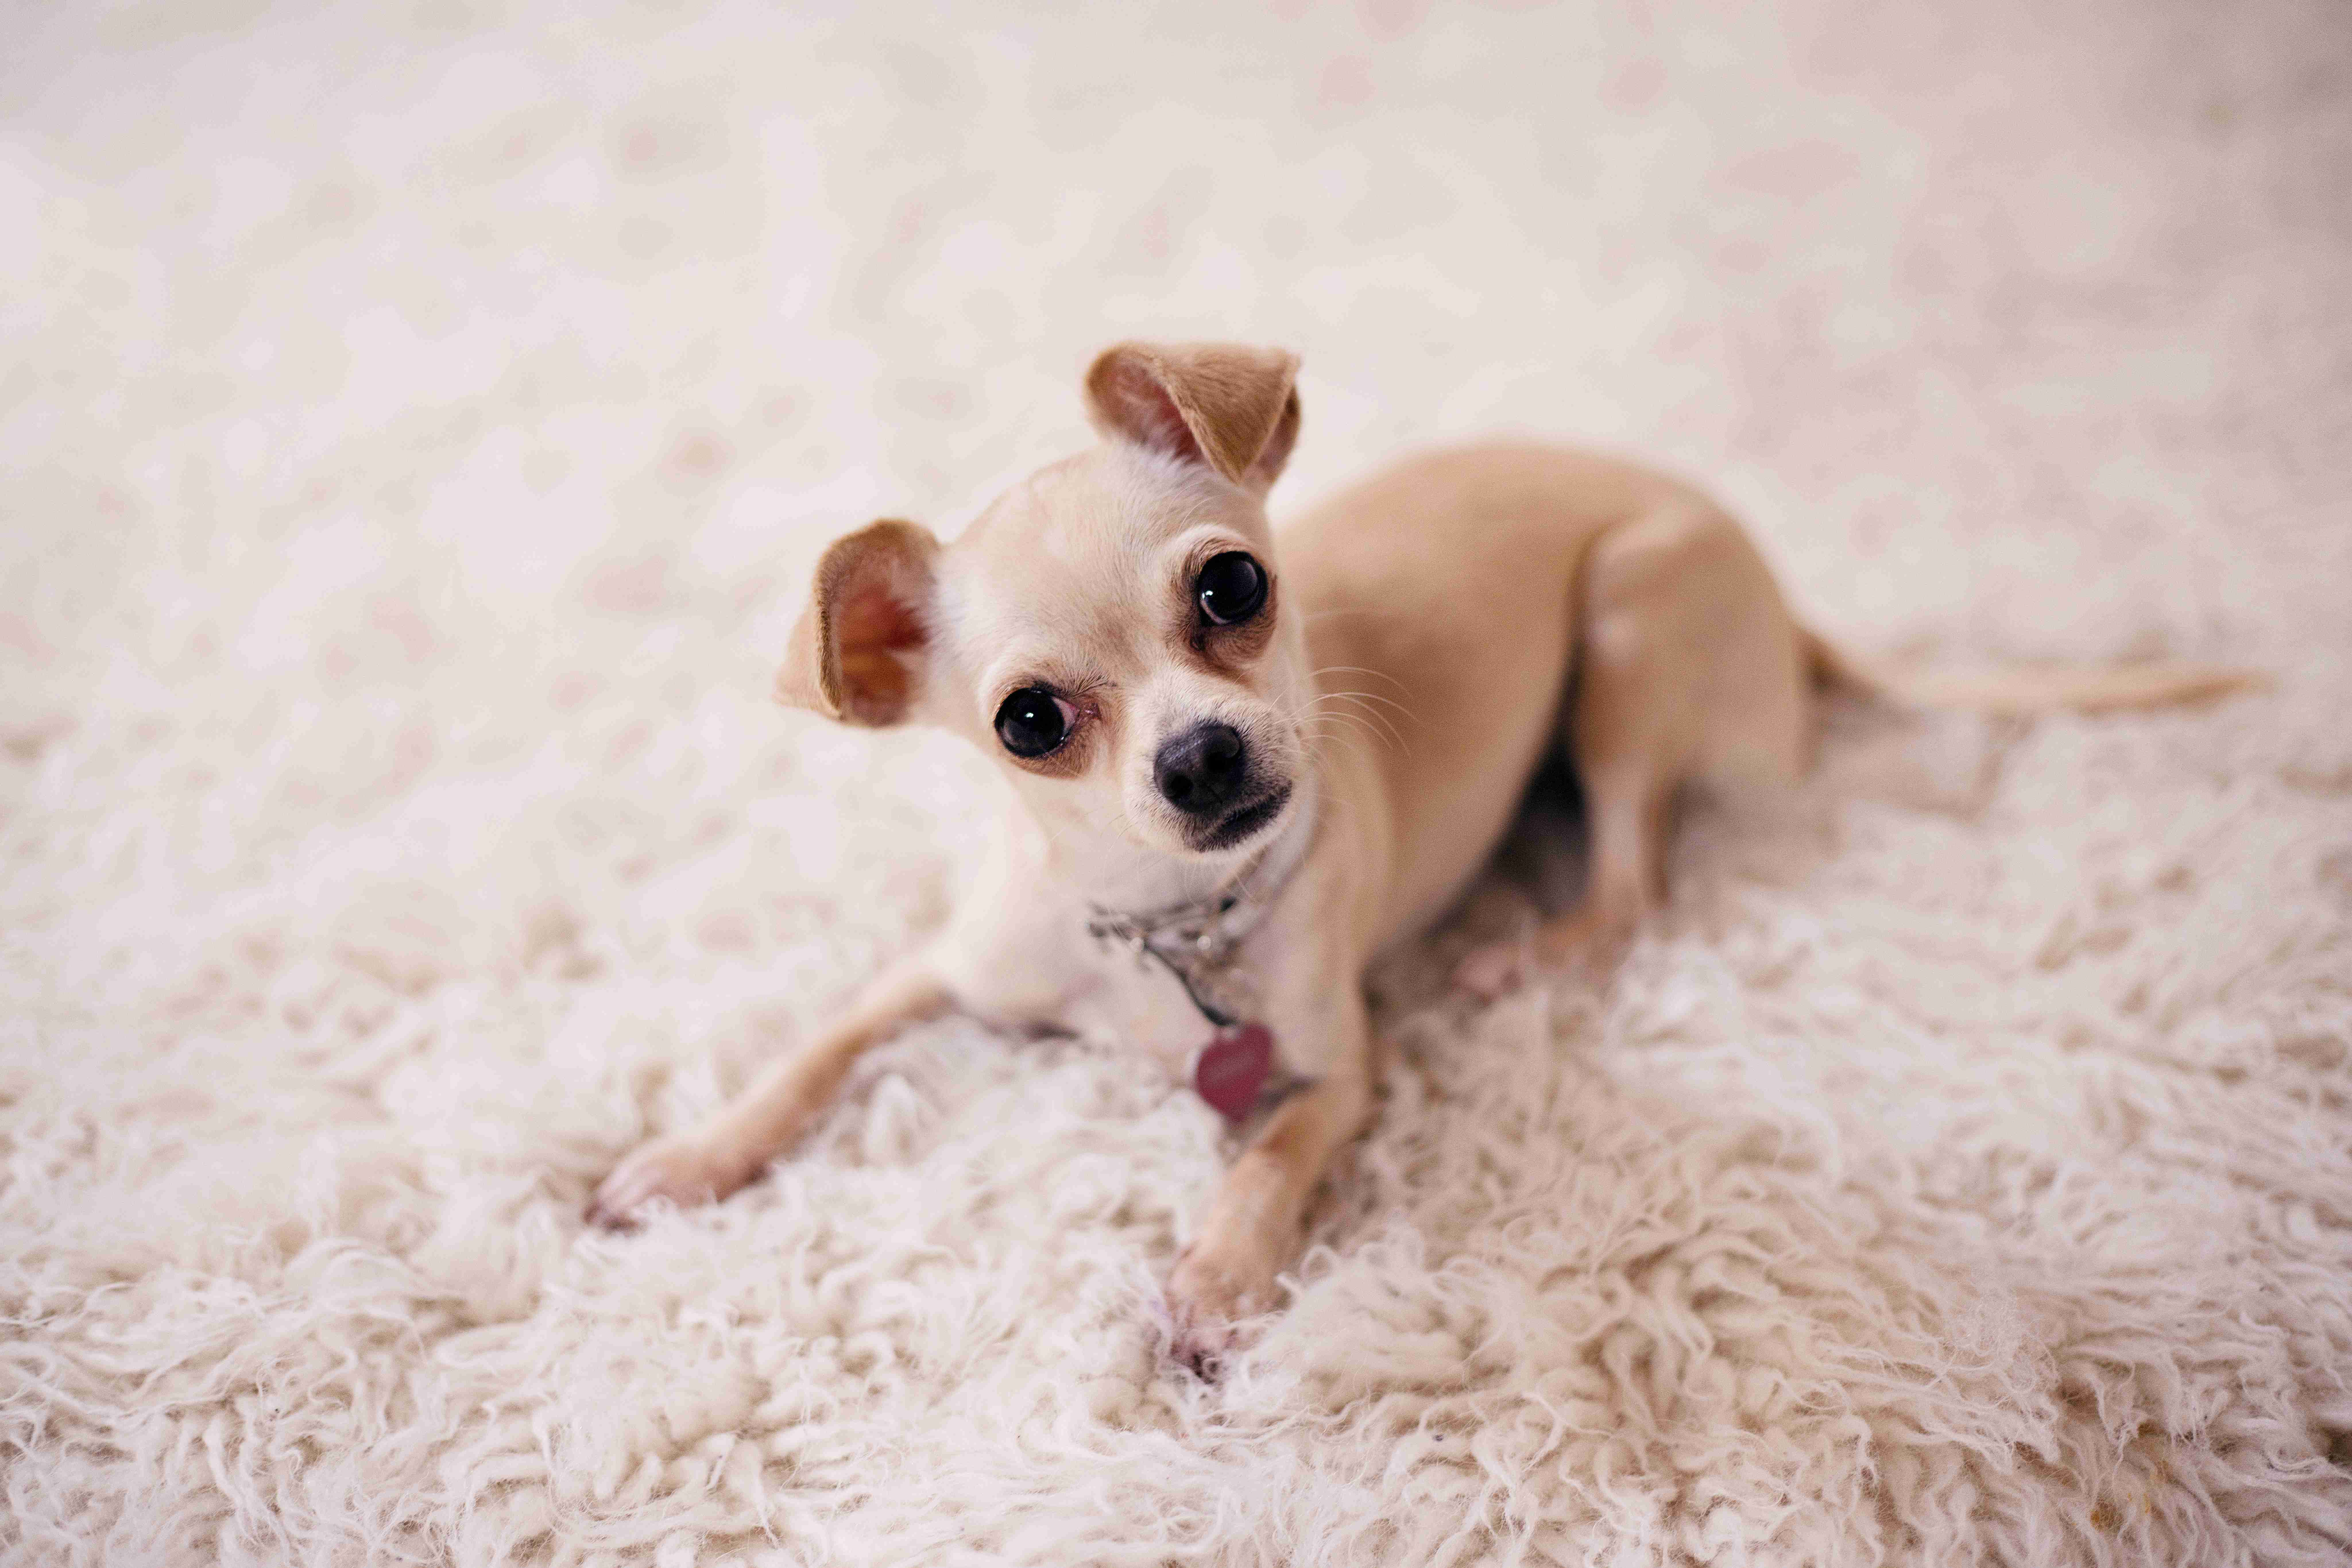 What are some common misconceptions about Chihuahuas that may contribute to their aggression?